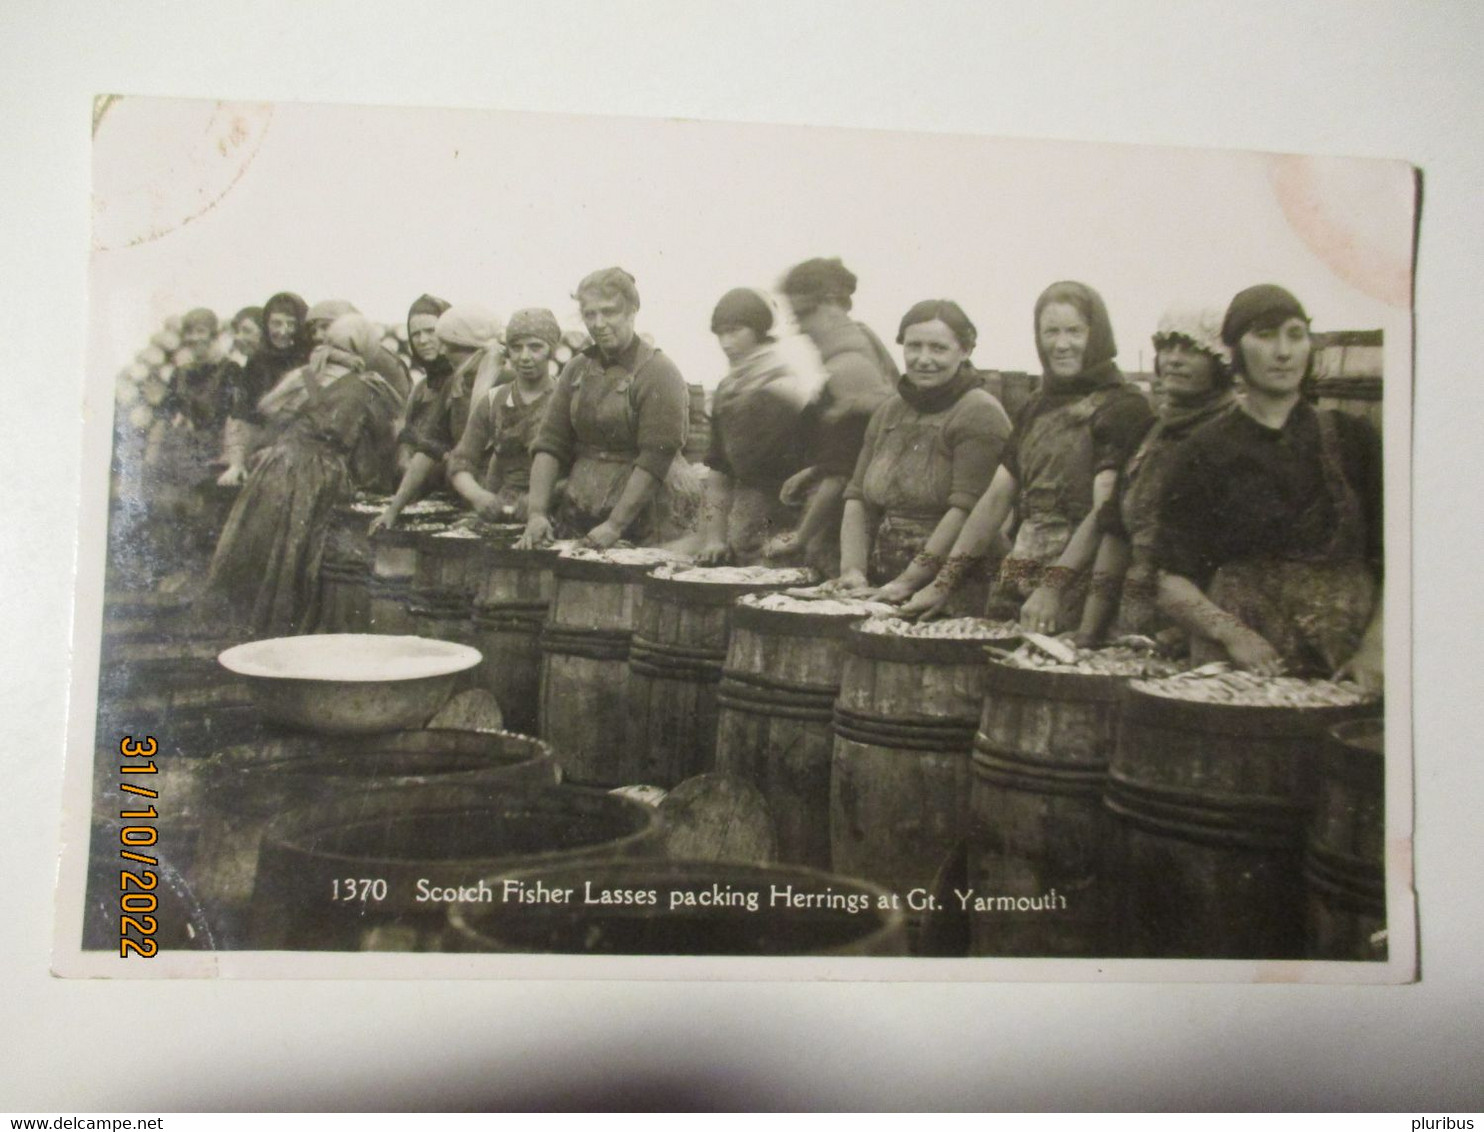 SCOTCH FISHER LASSES PACKING HERRINGS AT GREAT YARMOUTH , 9-9 - Great Yarmouth